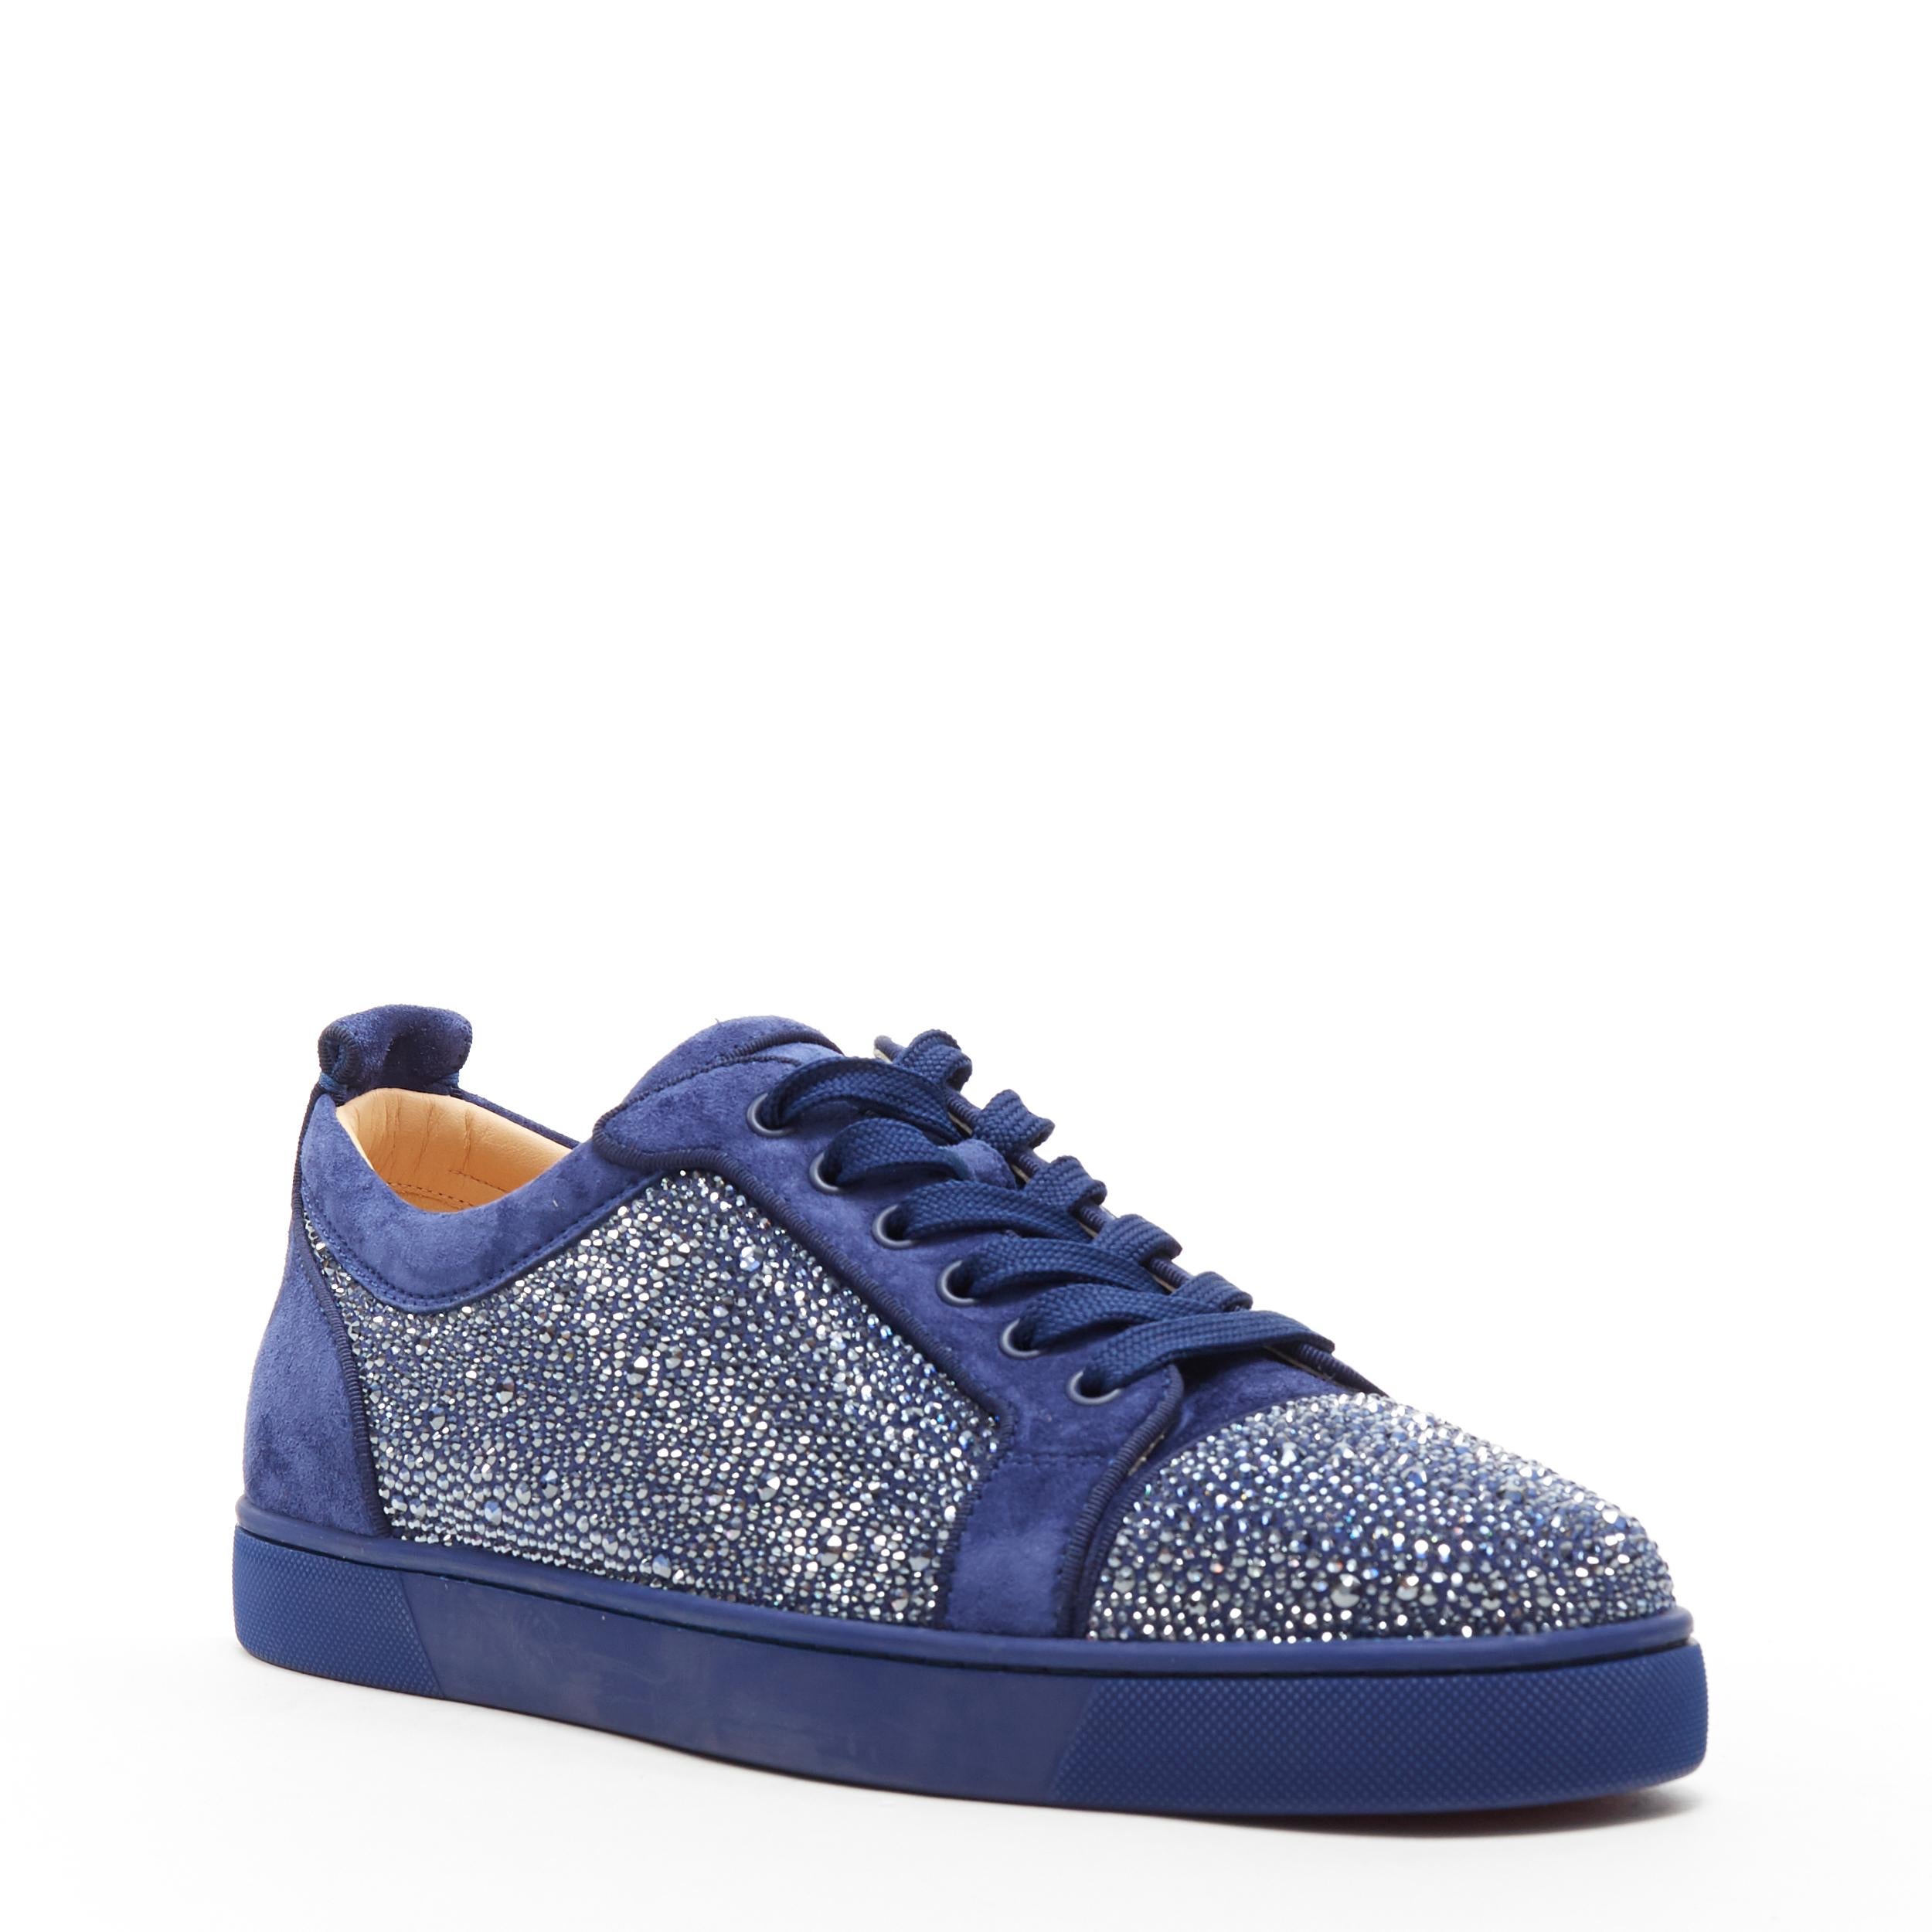 new CHRISTIAN LOUBOUTIN Louis Junior blue strass crystal low top sneaker EU43
Brand: Christian Louboutin
Designer: Christian Louboutin
Model Name / Style: Louis Junior
Material: Suede
Color: Blue
Pattern: Solid
Closure: Lace up
Extra Detail: Style